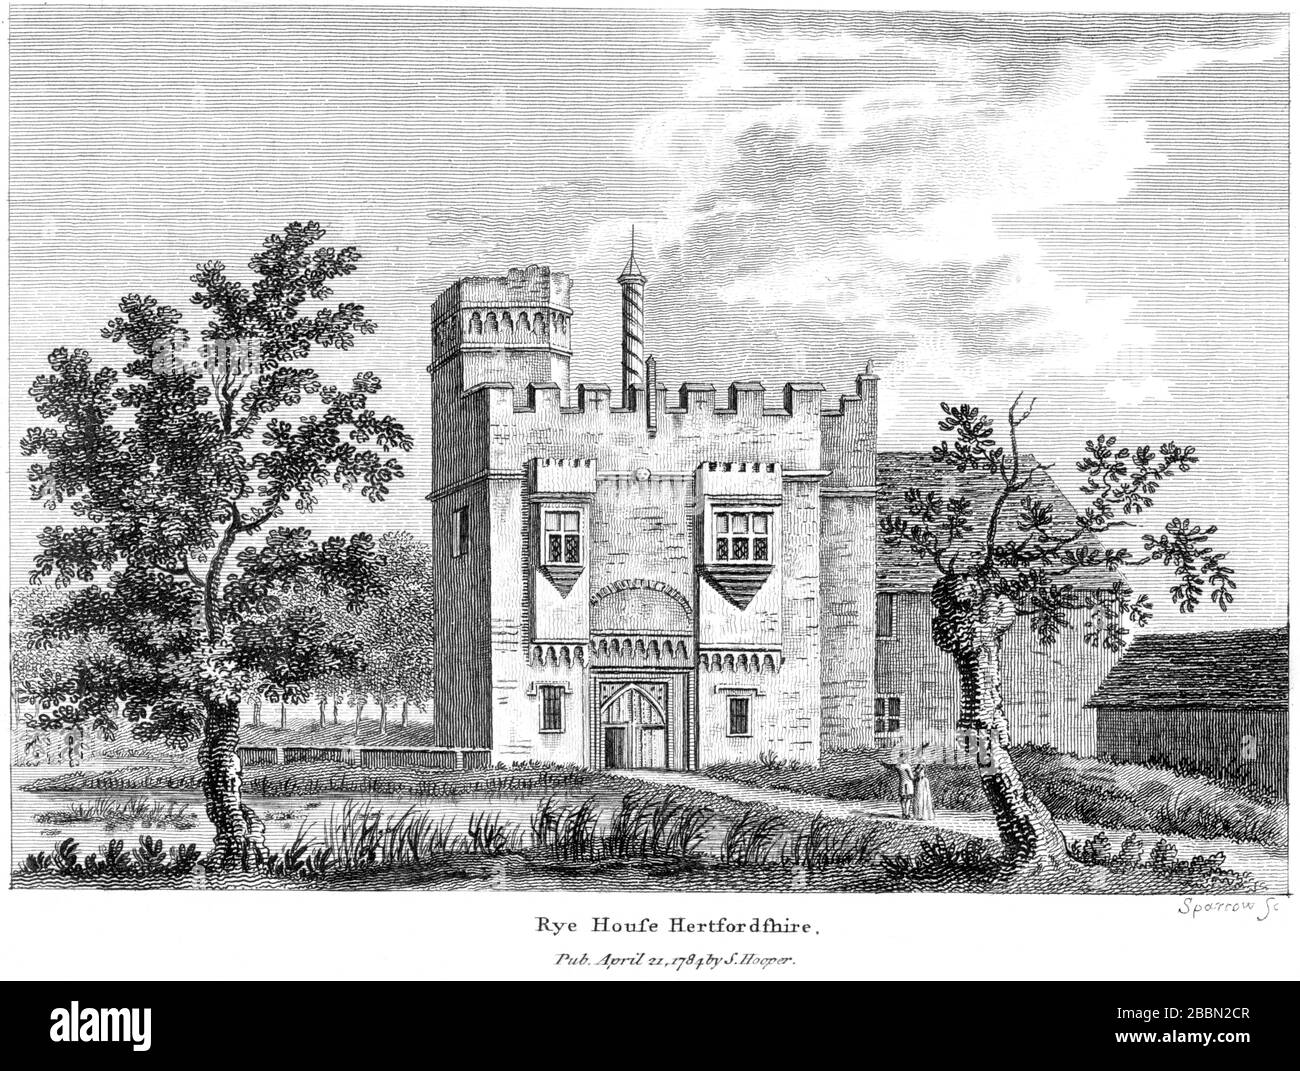 An engraving of Rye House Hertfordshire 1784 scanned at high resolution from a book published around 1786. Believed copyright free. Stock Photo